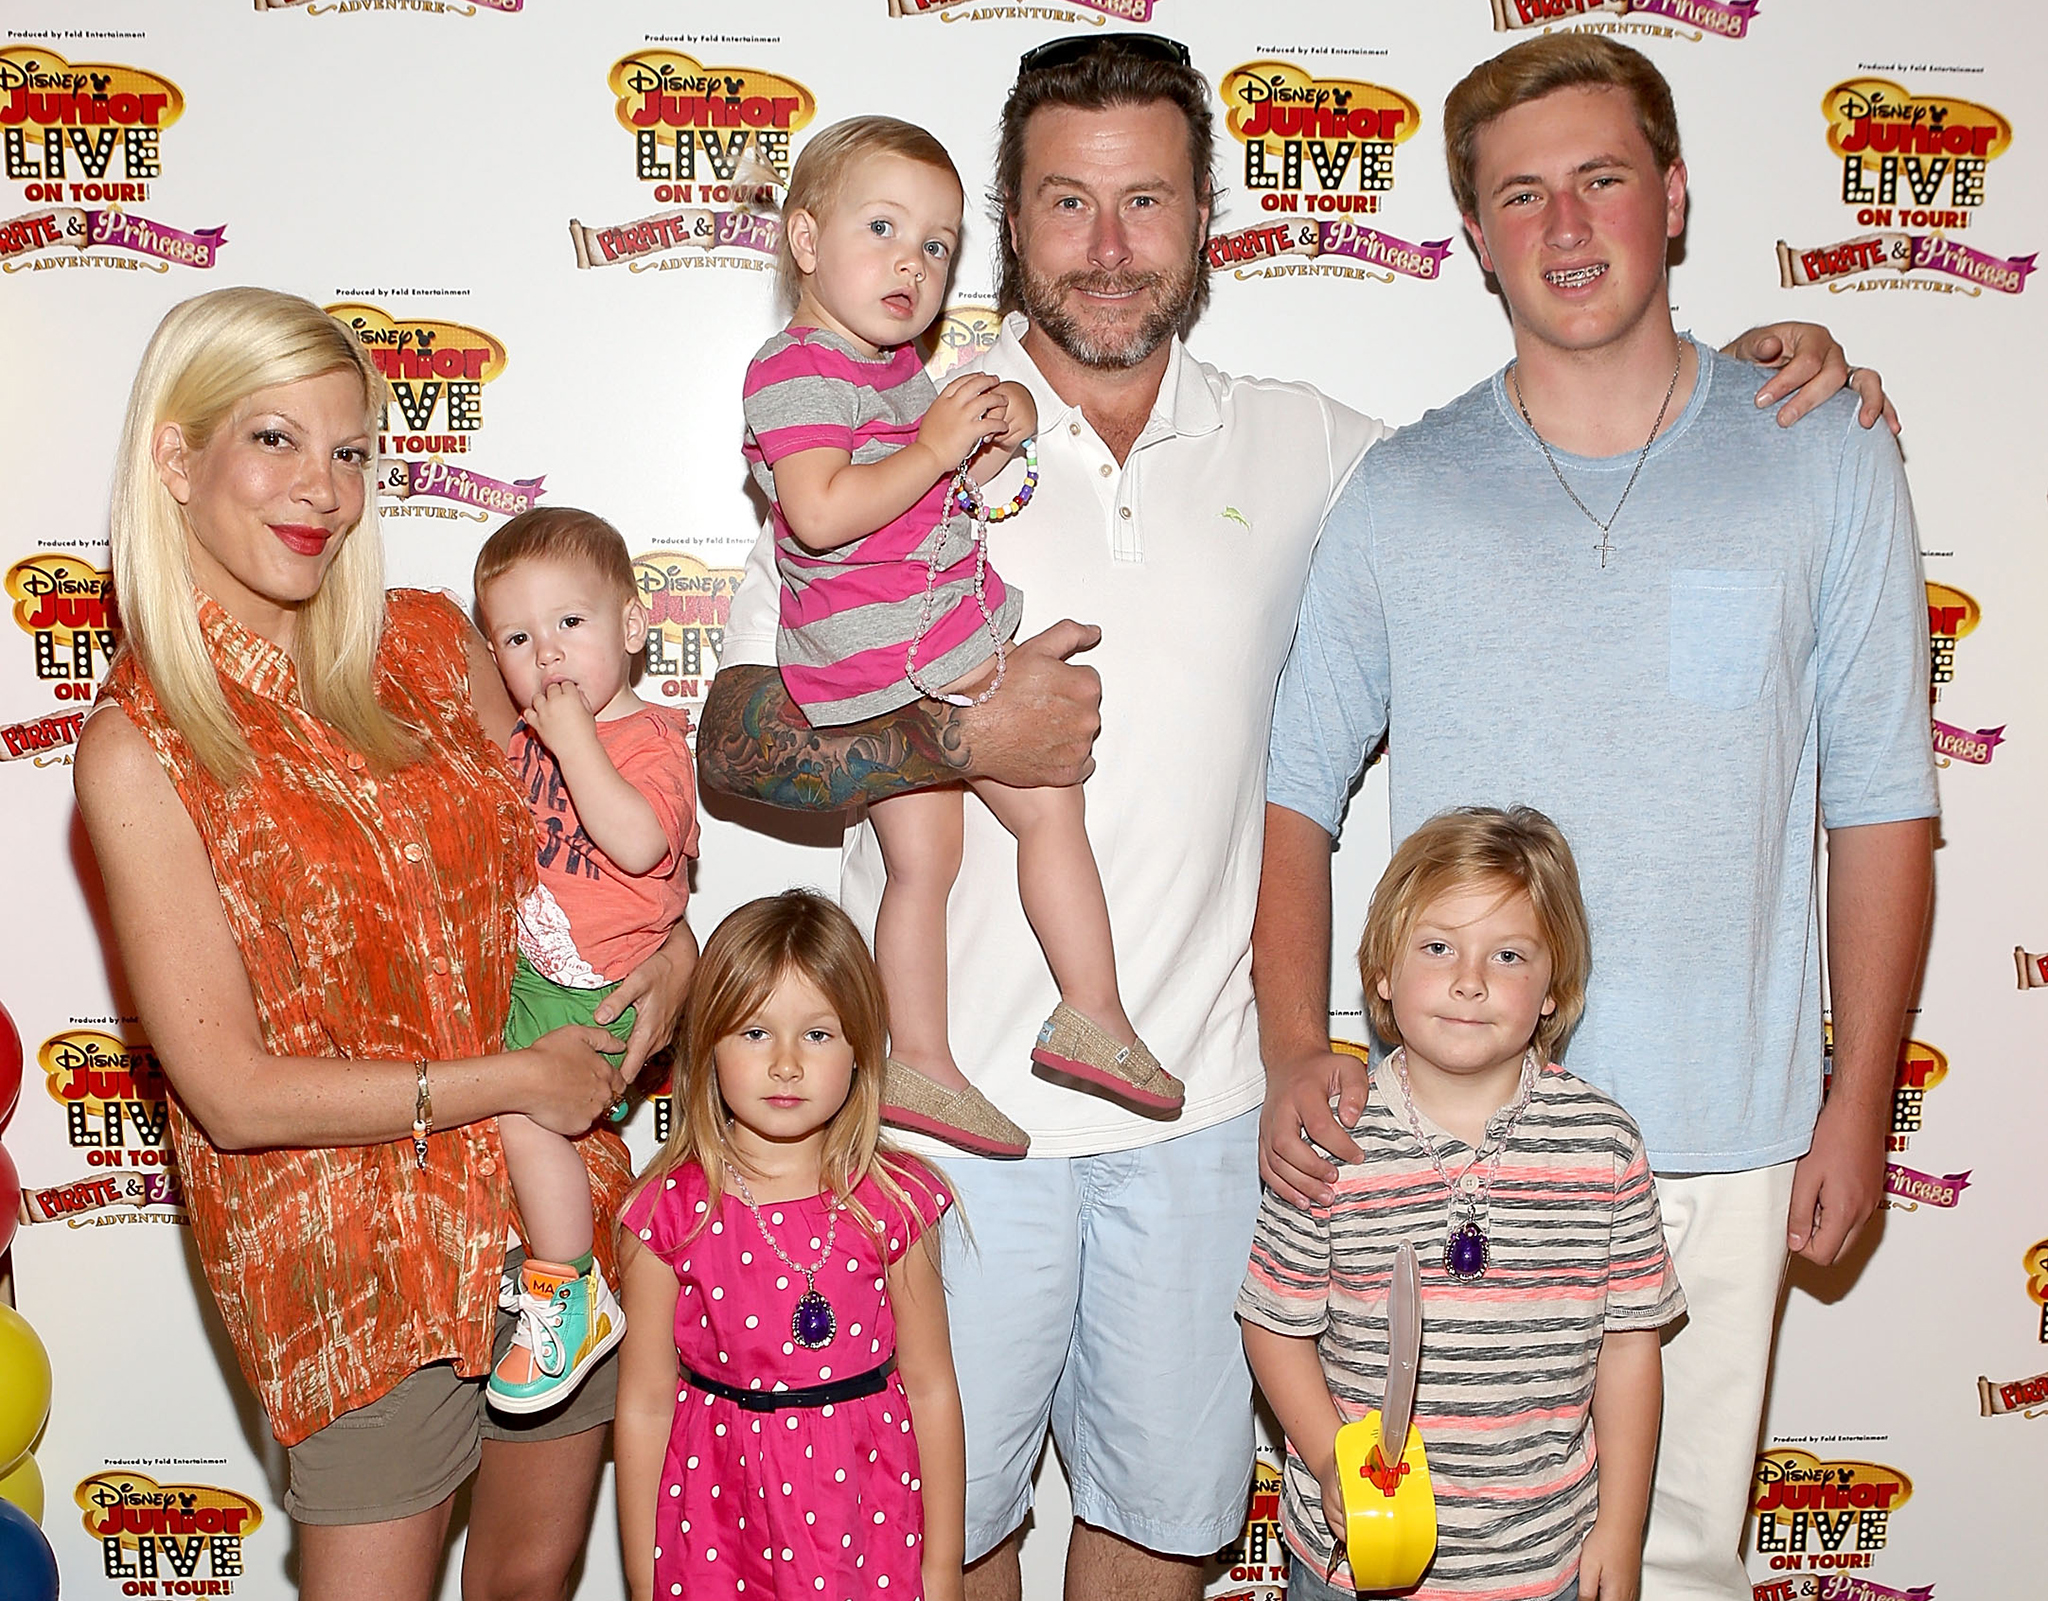 HOLLYWOOD, CA - SEPTEMBER 29: Actress Tori Spelling and family attend the Celebrity Party with Disney Junior Live On Tour! Pirate & Princess Adventure at Dolby Theatre on September 29, 2013 in Hollywood, California. (Photo by Jesse Grant/WireImage)